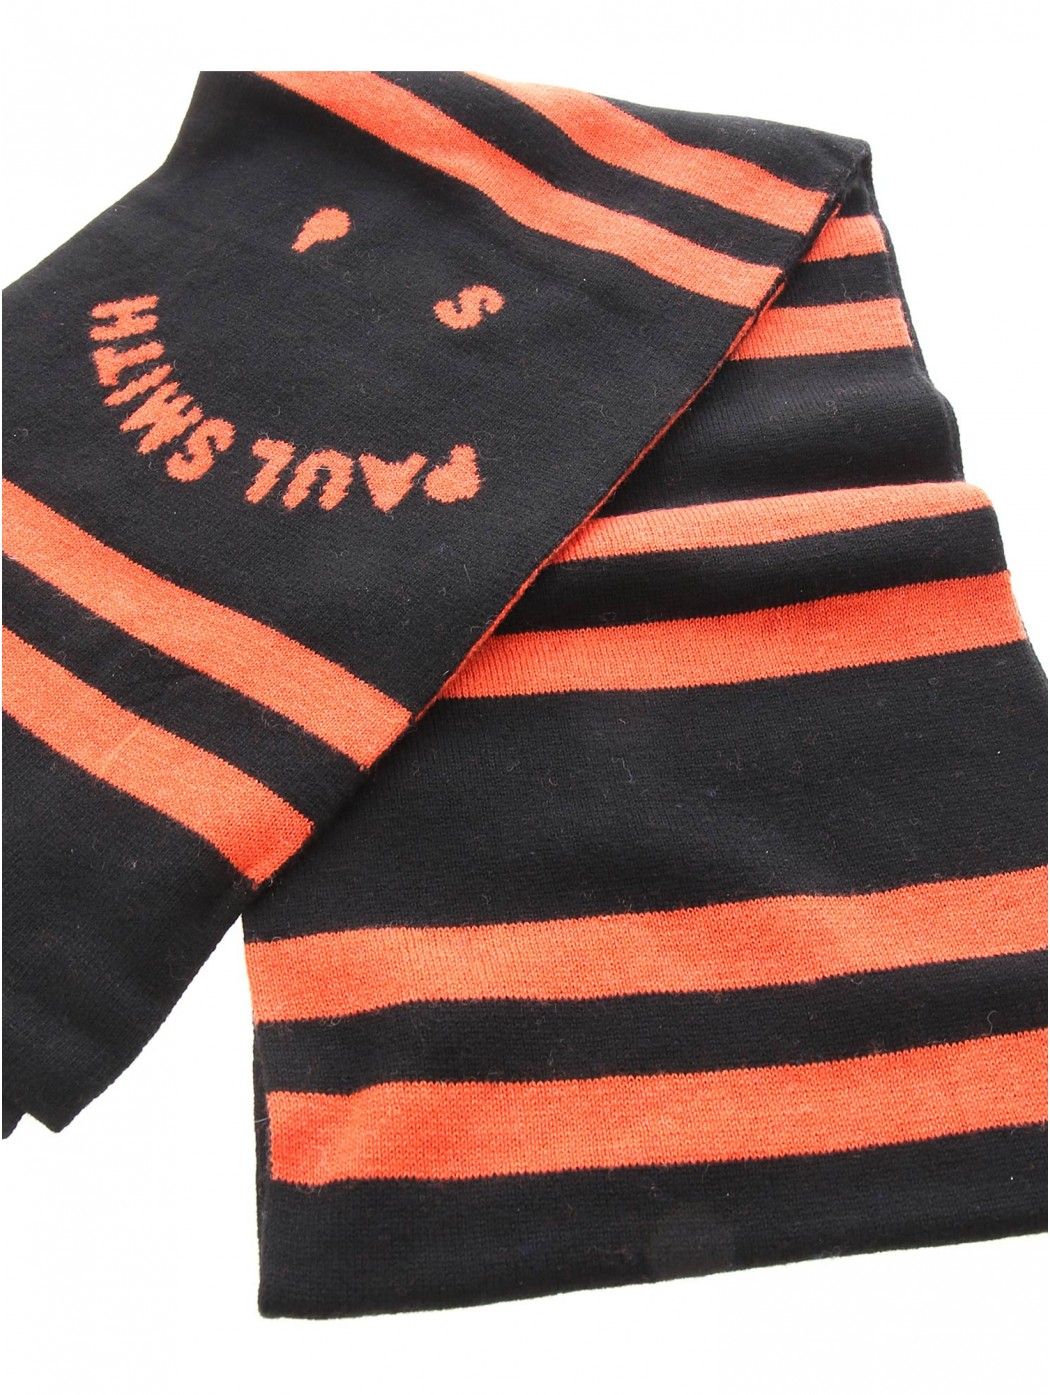 MENS SCARF PS FACE PAUL SMITH M2A957FGS89 79-0